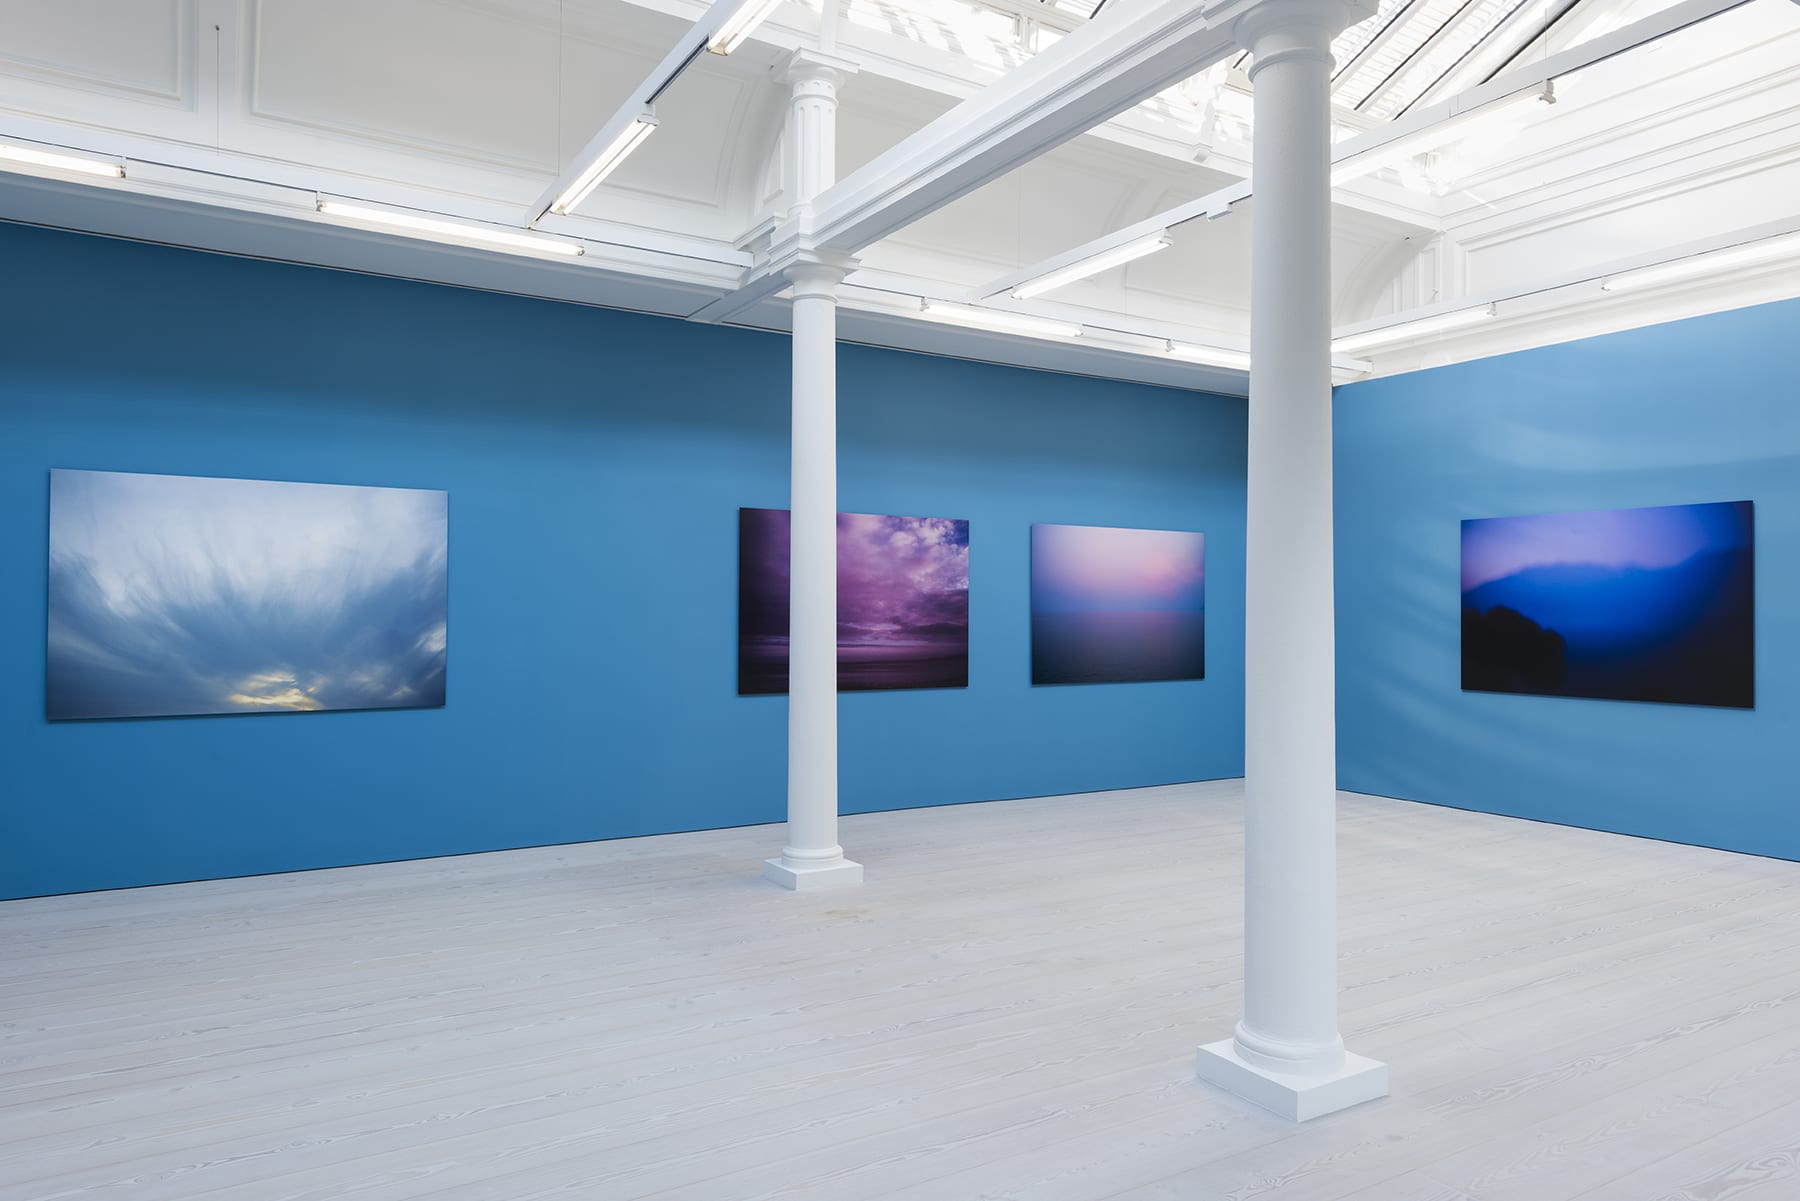 4 large color photographs of the sky hanging on a bright blue wall in a room with skylights and 2 columns.